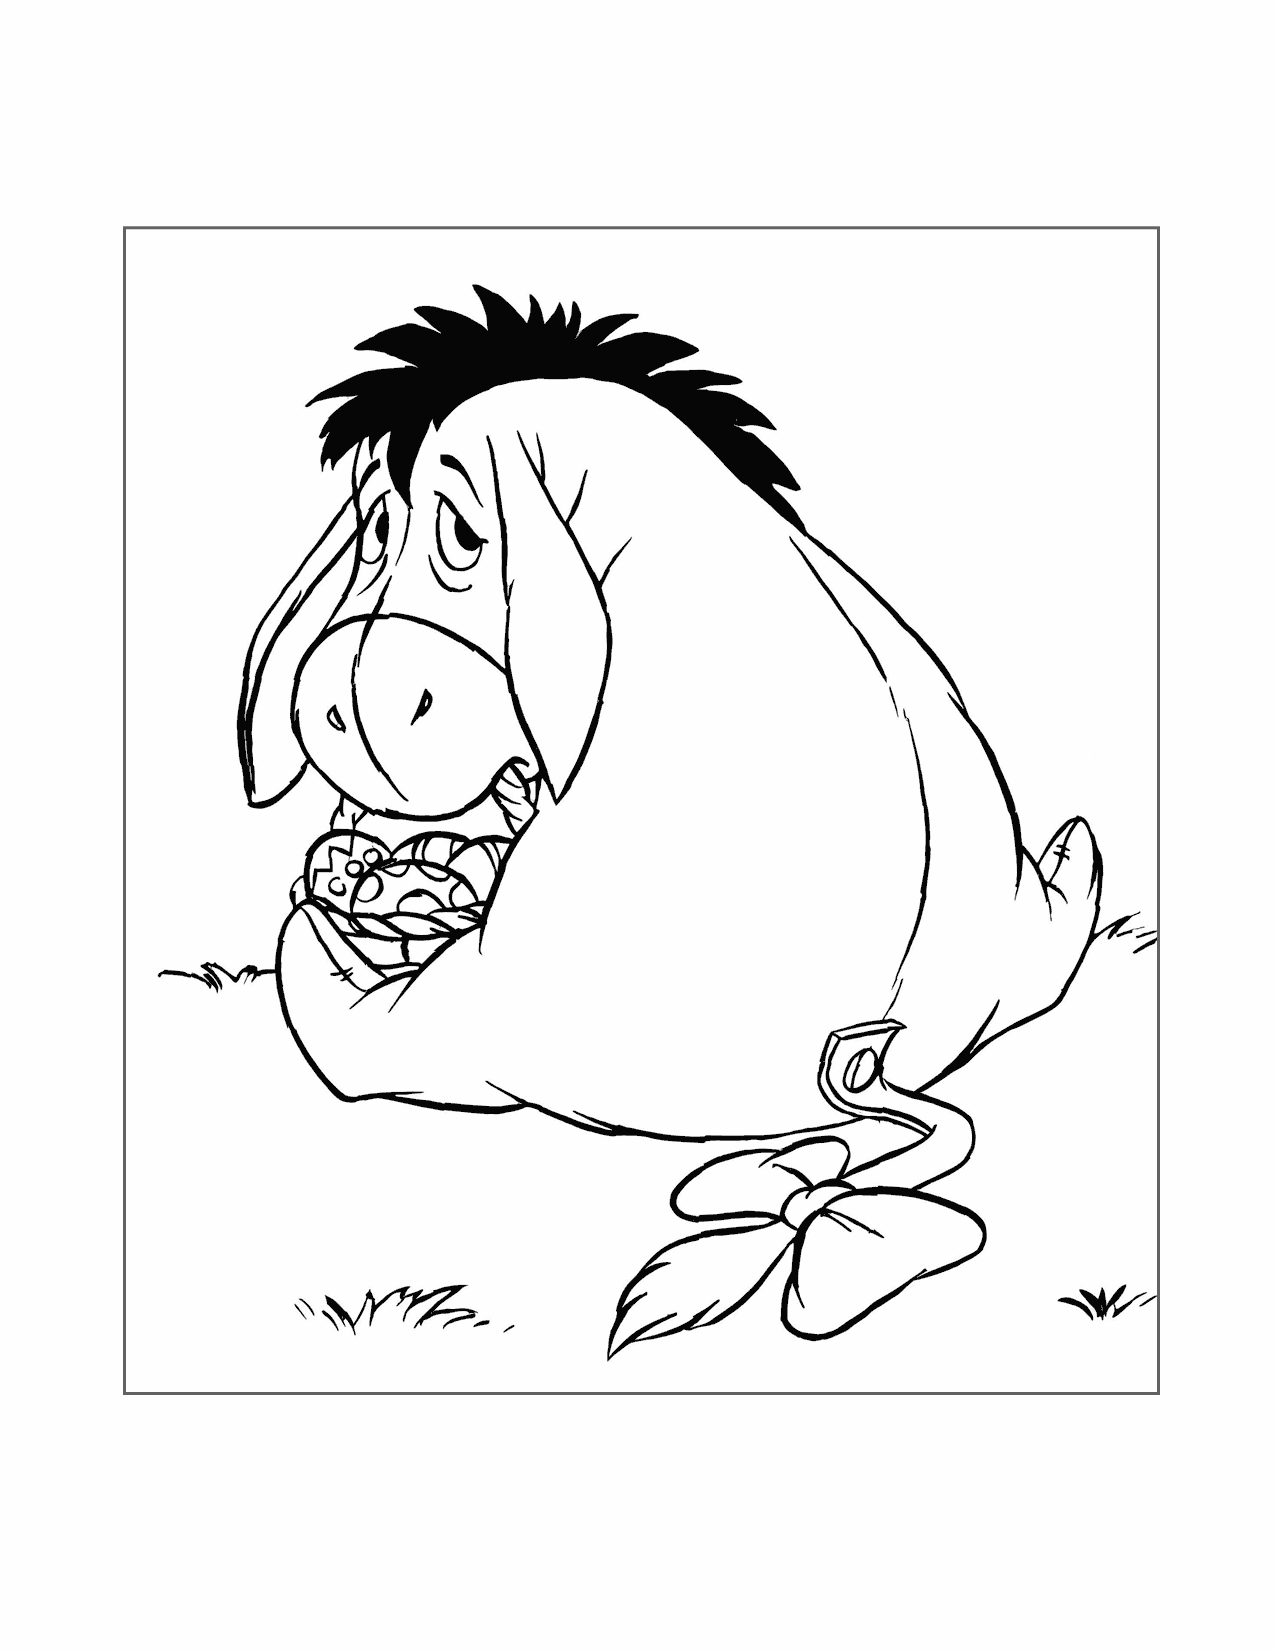 Eeyore Finds Easter Eggs Coloring Page